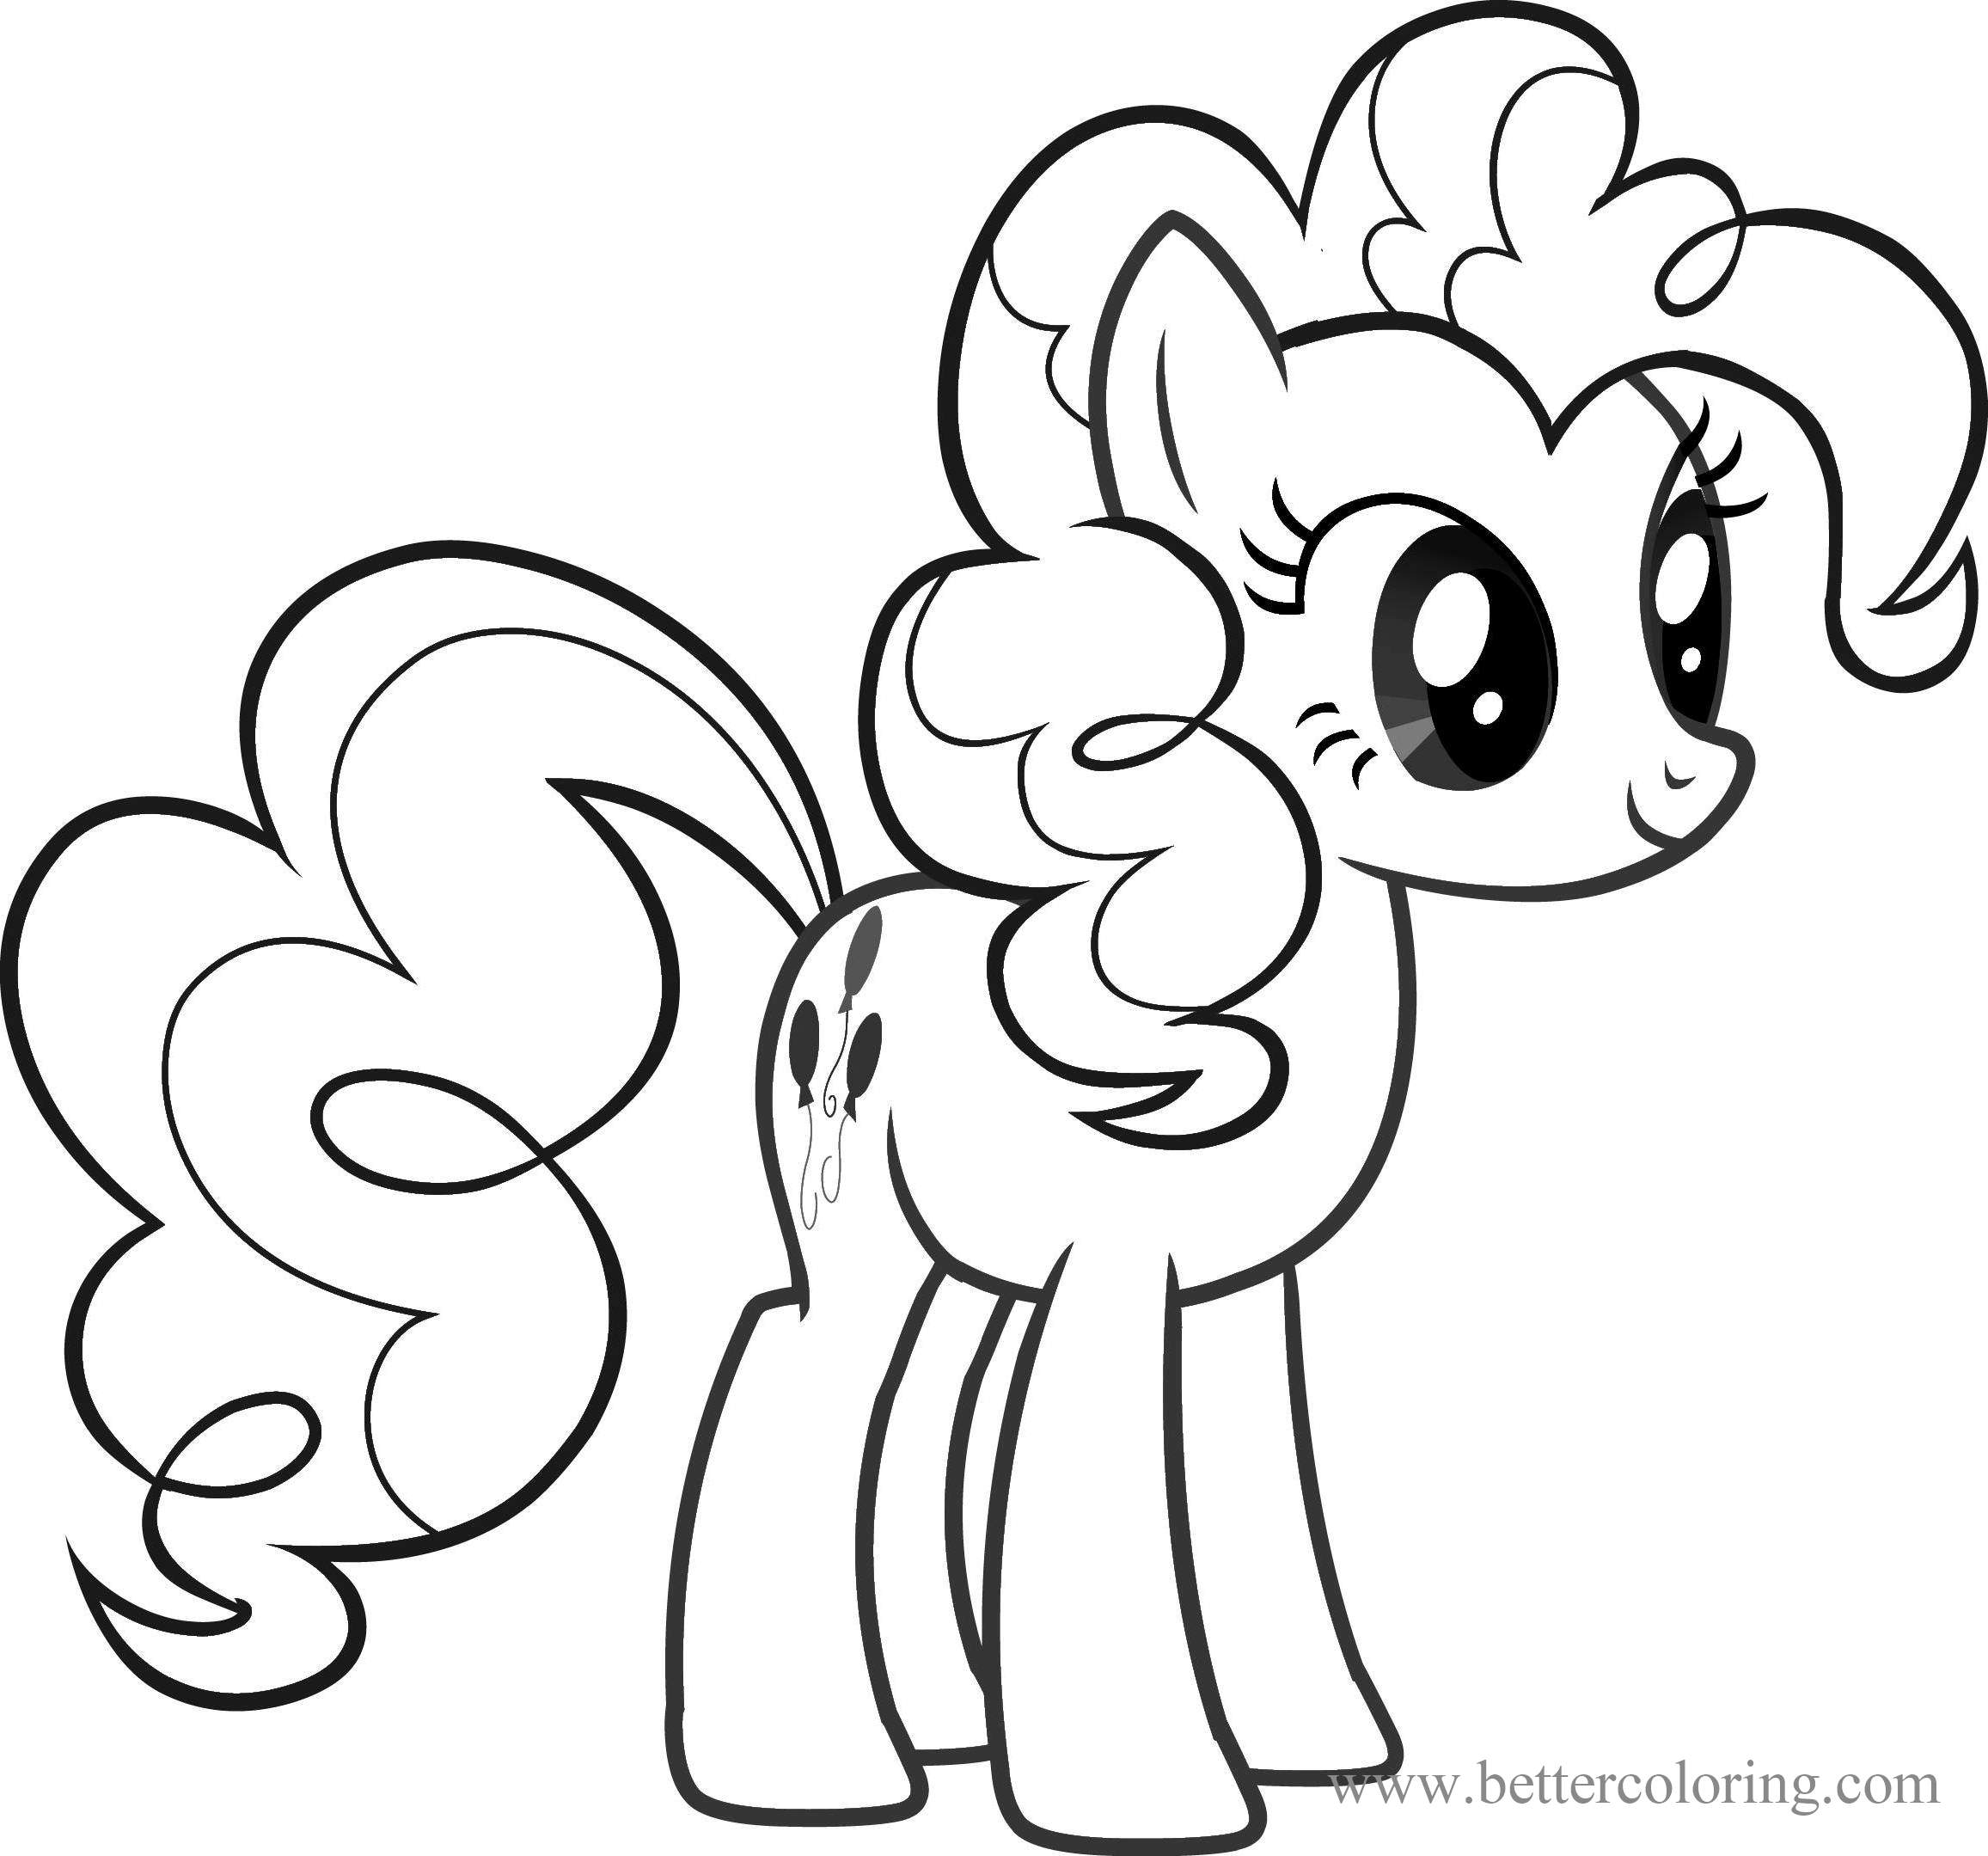 Draw So Cute MLP Coloring Pages - Free Printable Coloring Pages